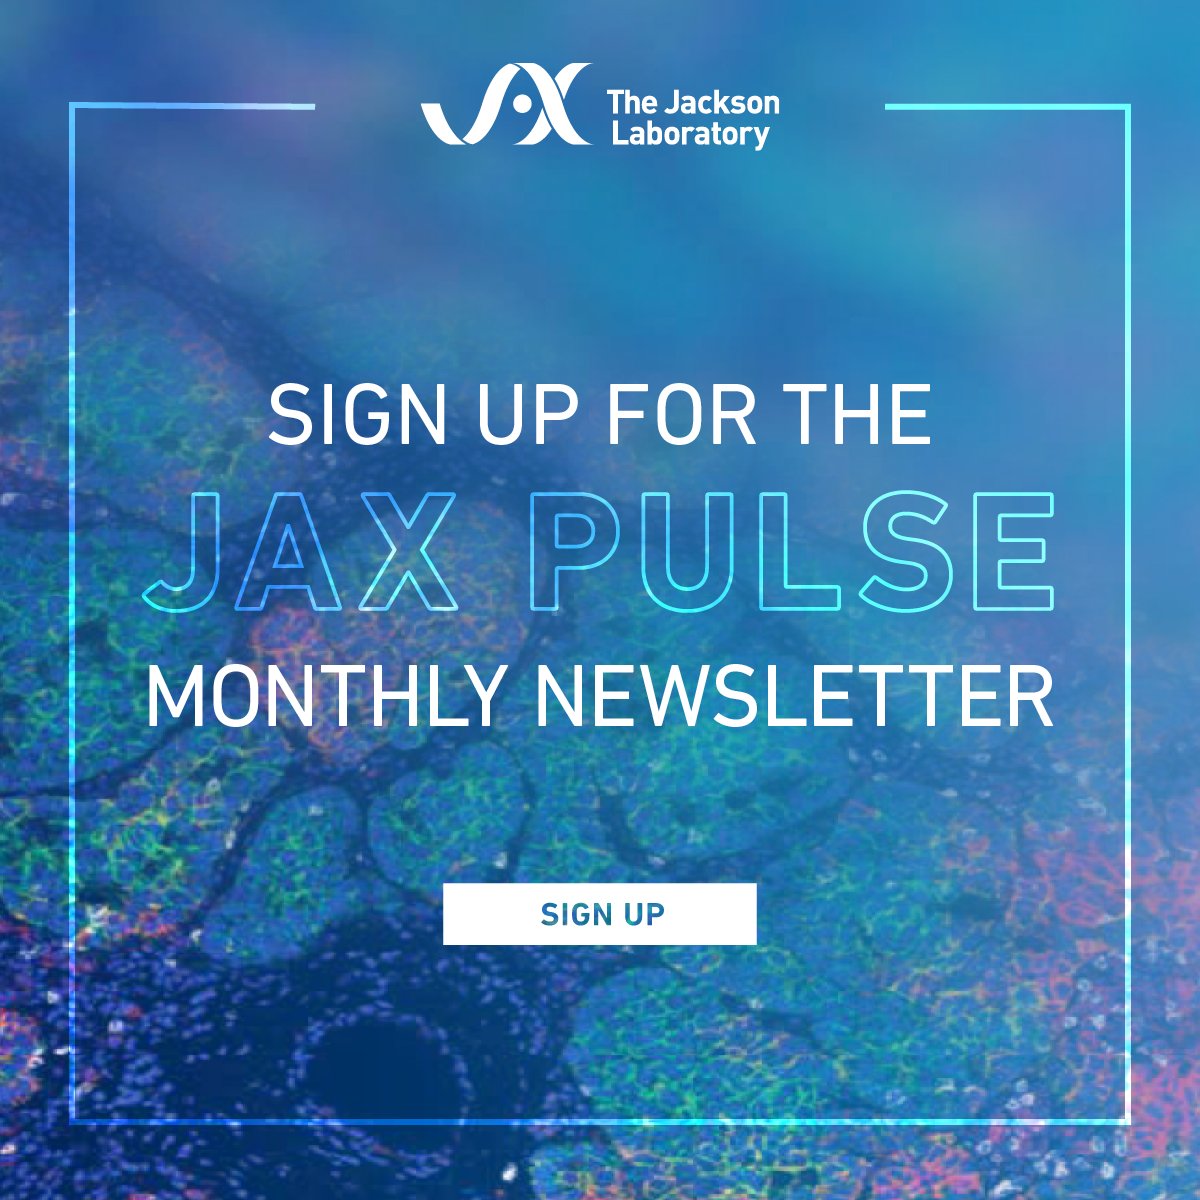 What is JAX Pulse? It's a monthly newsletter from JAX® Mice, Clinical and Research Services, read by over 10,000 scientists! Join our community and stay informed about preclinical services, #mousemodels, upcoming webinars & more. Subscribe today! bit.ly/3vHaTzQ